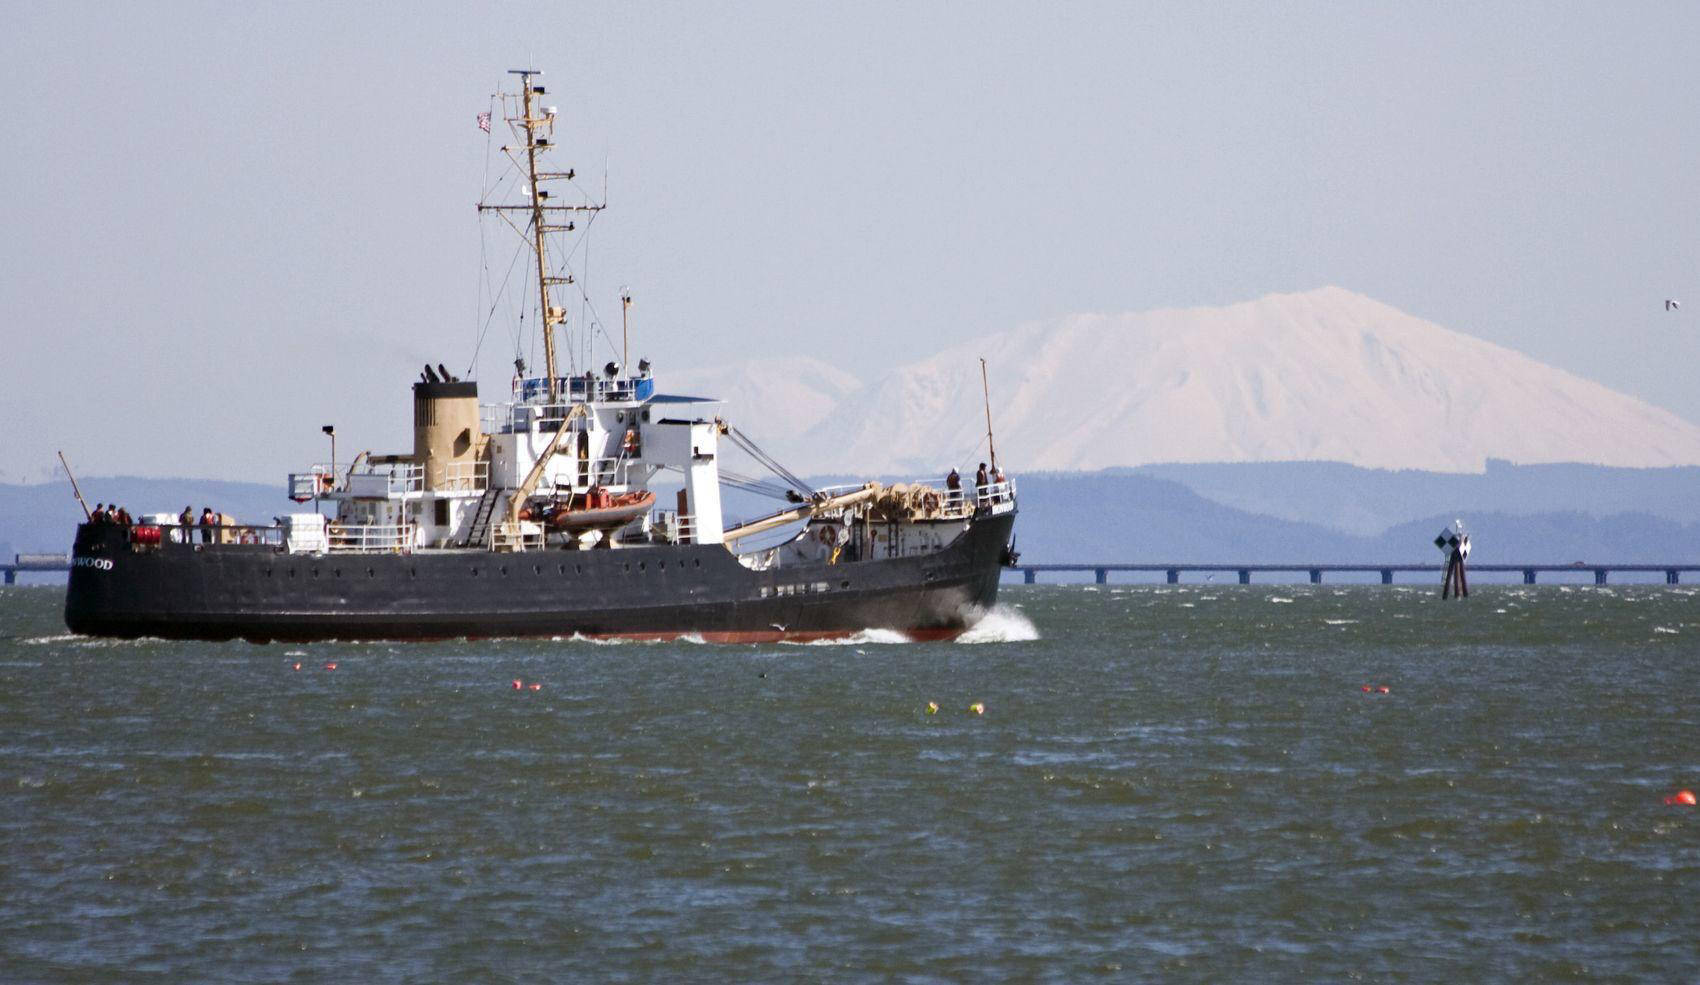 The 180-foot USCGC Ironwood, the first Coast Guard vessel to be homeported in Homer, was decommissioned in Kodiak on Oct. 6, 2000, and now serves as a training vessel for the Job Corps’ Tongue Point Seamanship Academy in Astoria, Oregon. (Photo courtesy of Daily Astorian).